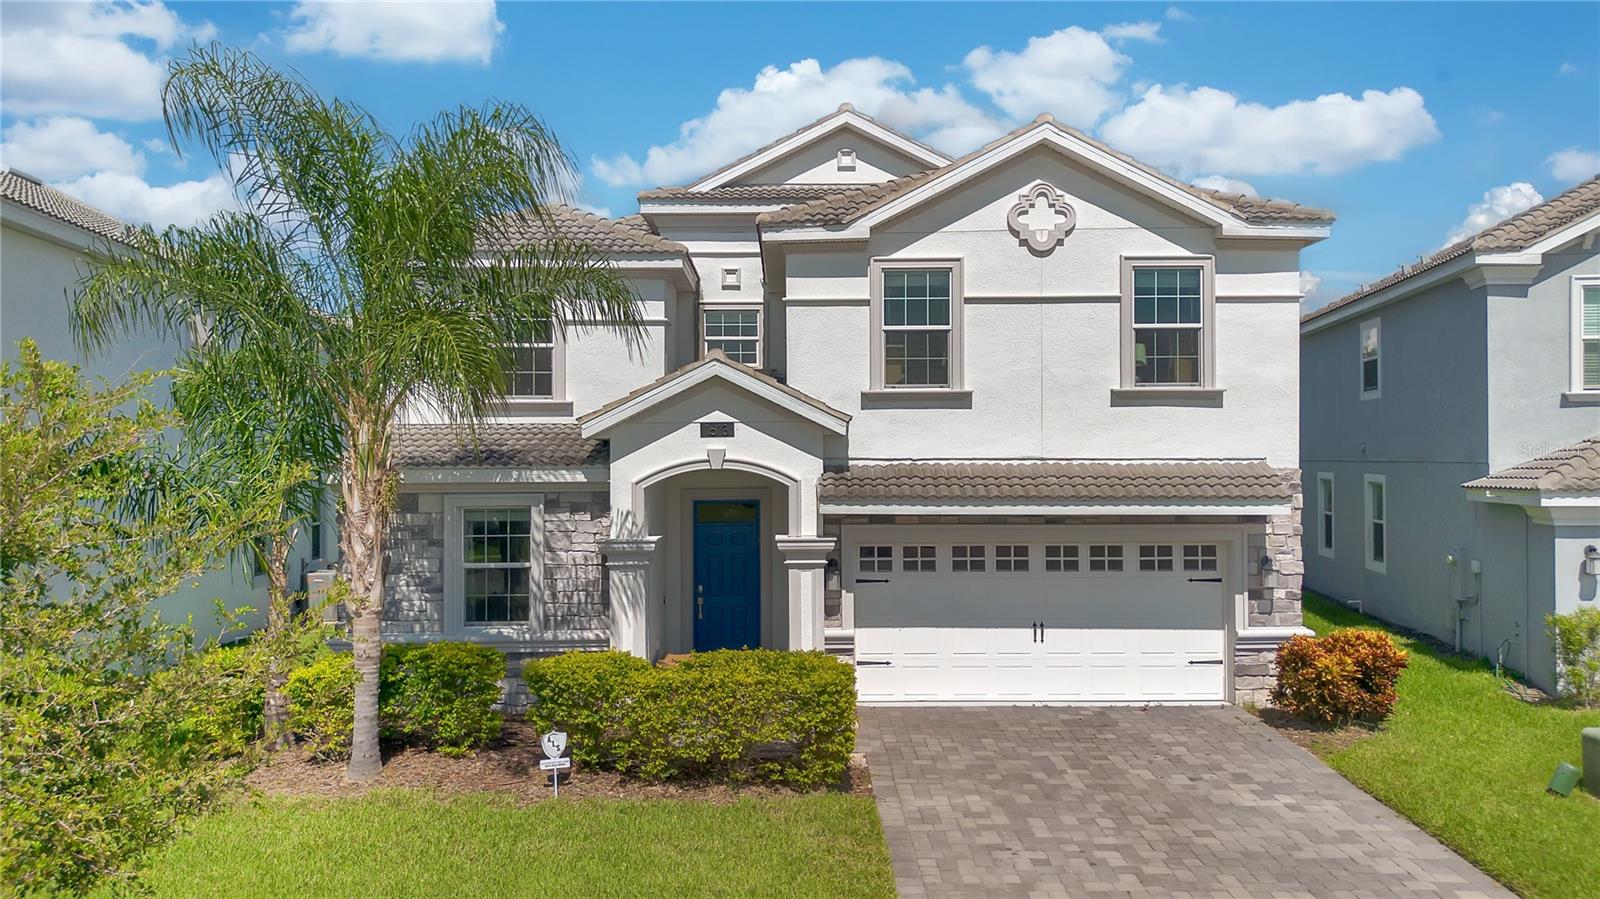 Details for 1613 Maidstone Court, Champions Gate, FL 33896